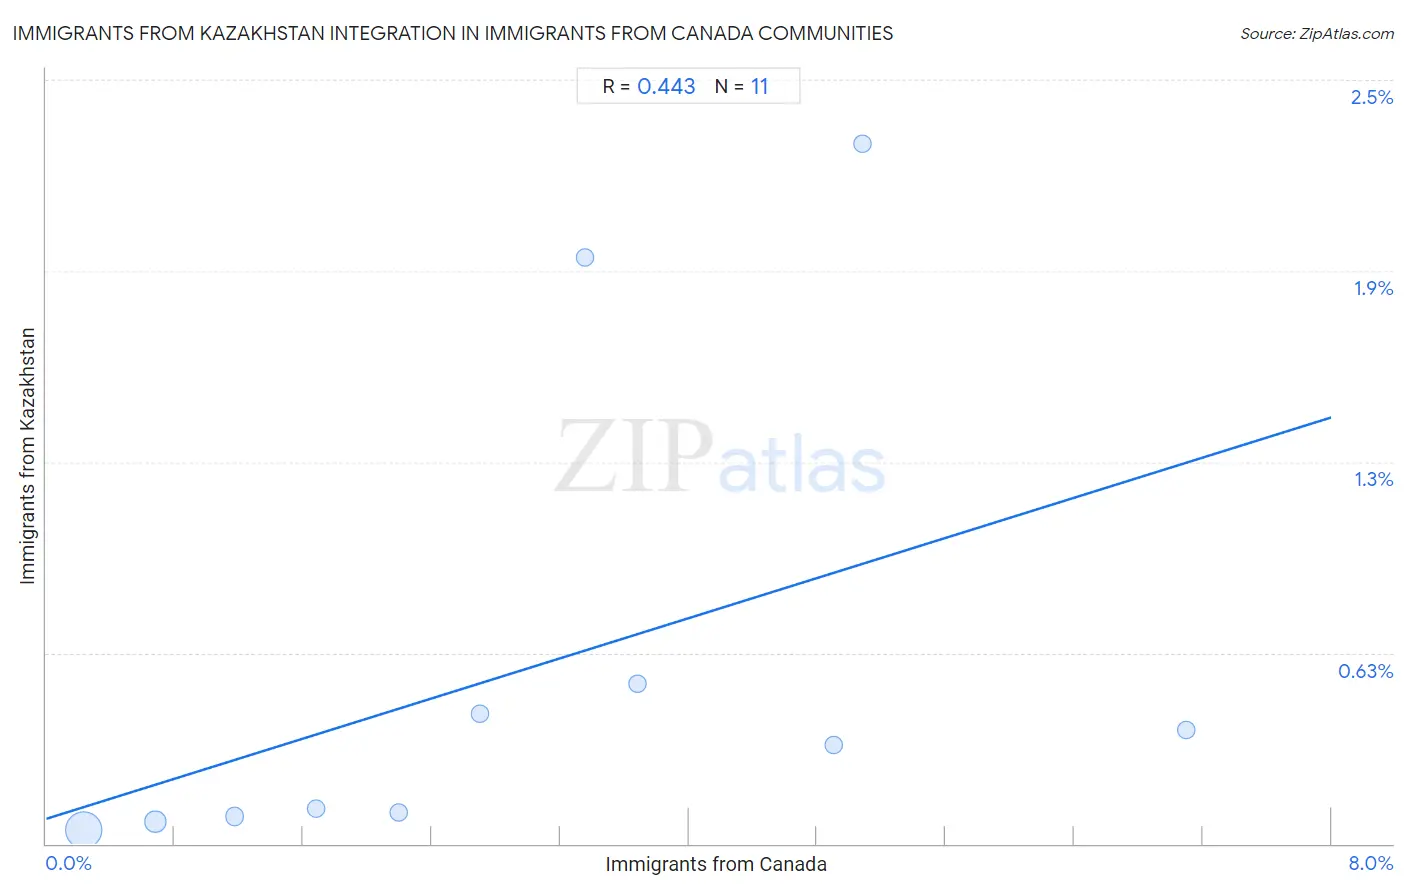 Immigrants from Canada Integration in Immigrants from Kazakhstan Communities